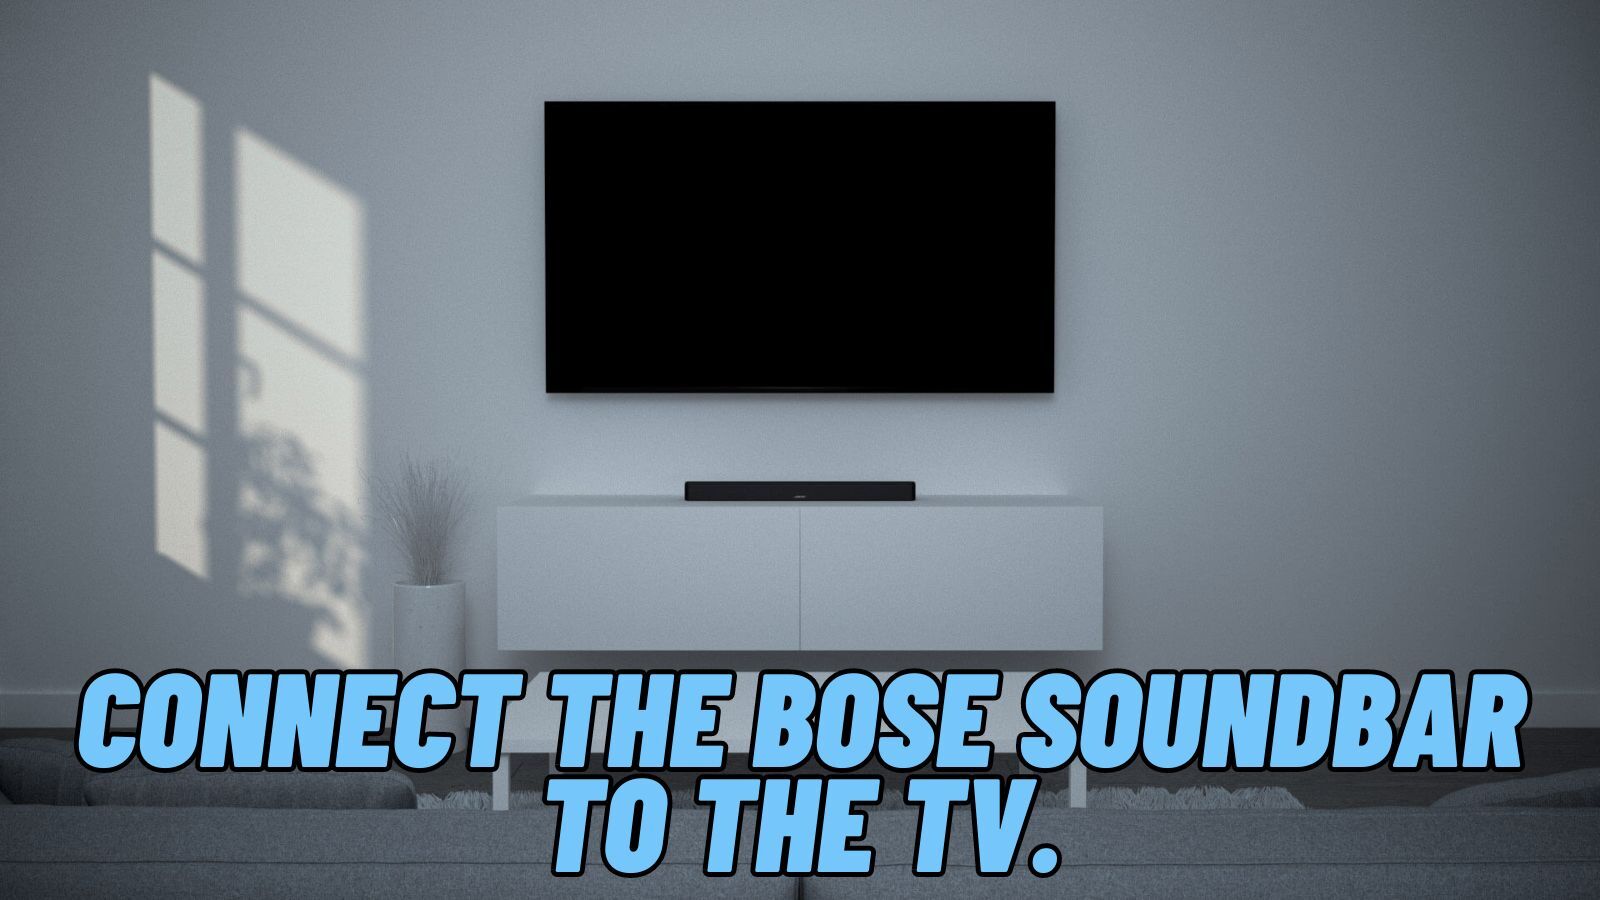 Connect the Bose Soundbar to the TV - For An Upgraded Home Audio Experience!